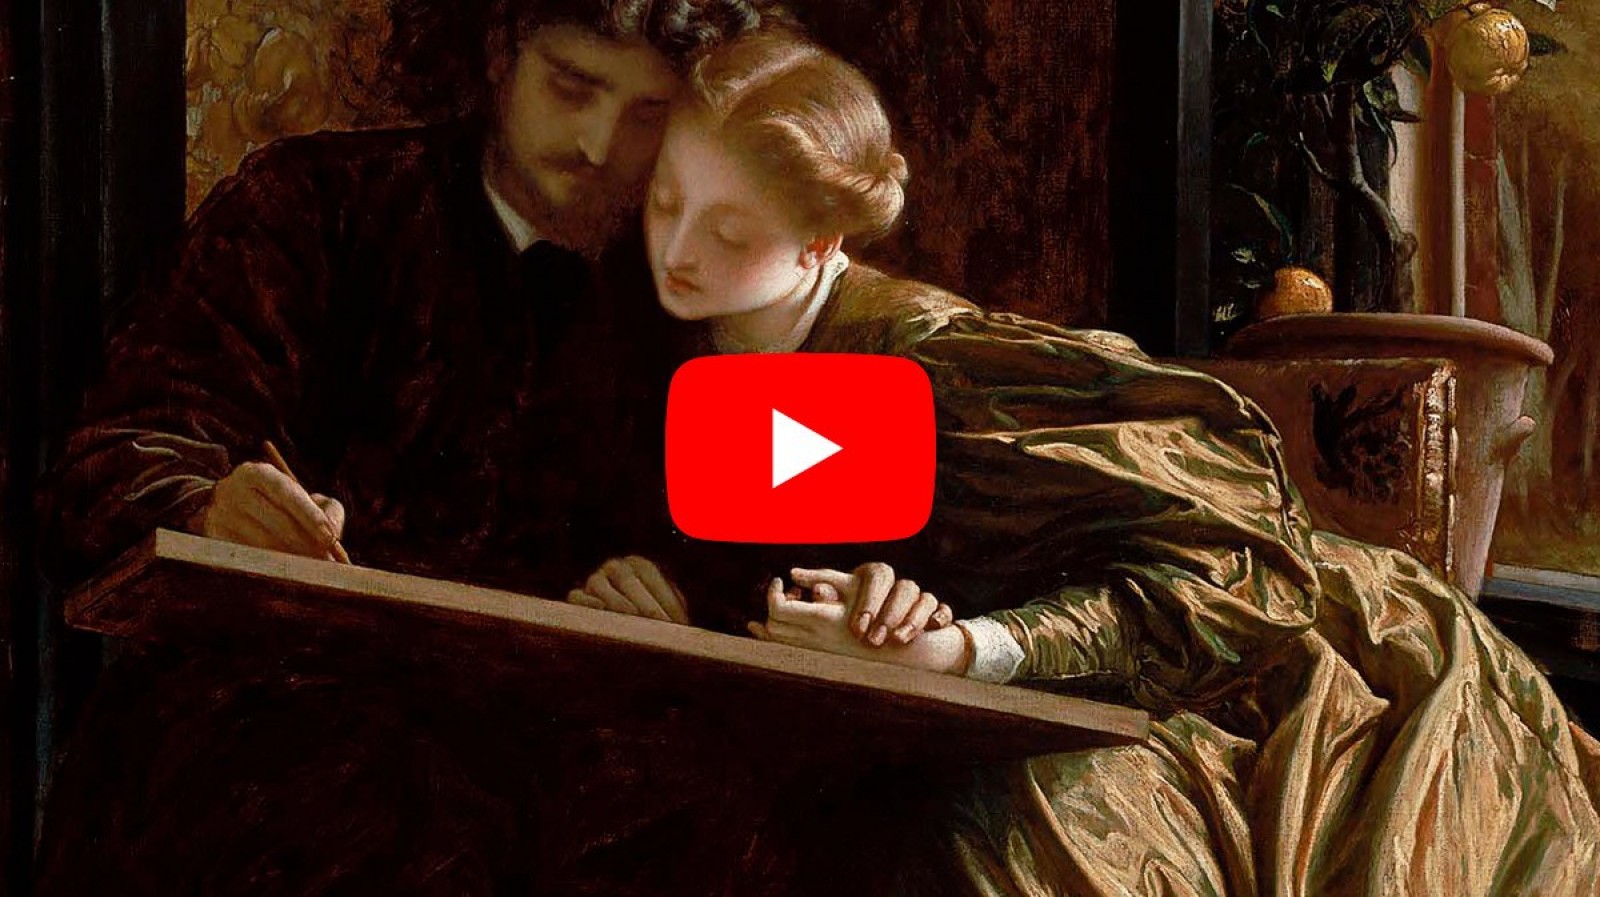 My Favourite Things: Lord Leighton’s “The Painter’s Honeymoon”